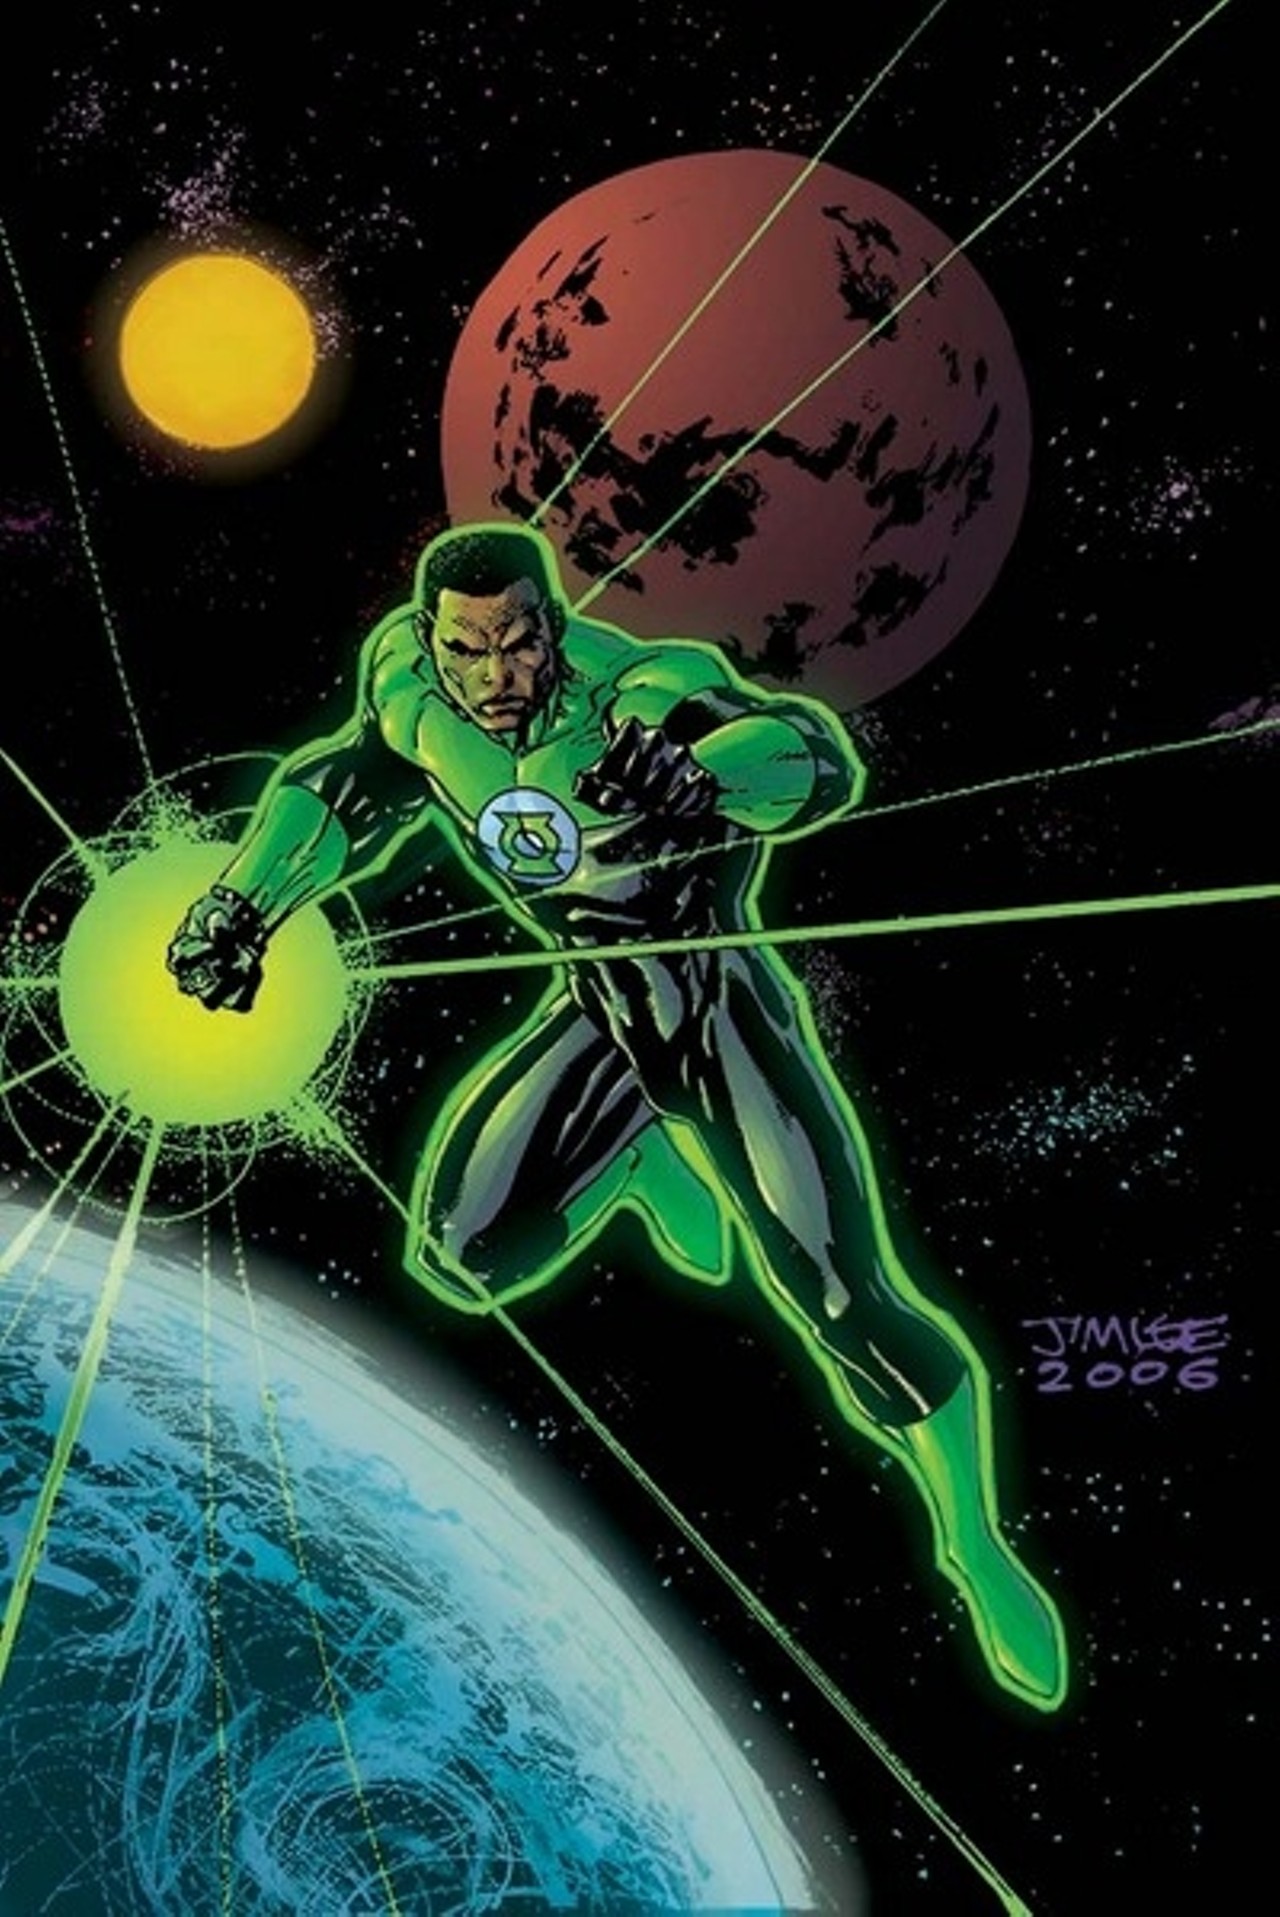 John Stewart
The Green Lantern Corp has had many members over the years, and more than a few from Earth, even if Hal Jordon is the man closely associated with the name. John Stewart is an oft-underrated Lantern; a badass Detroit marine who started out as Jordan’s standby but was eventually promoted to the position of Earth’s number one representative.